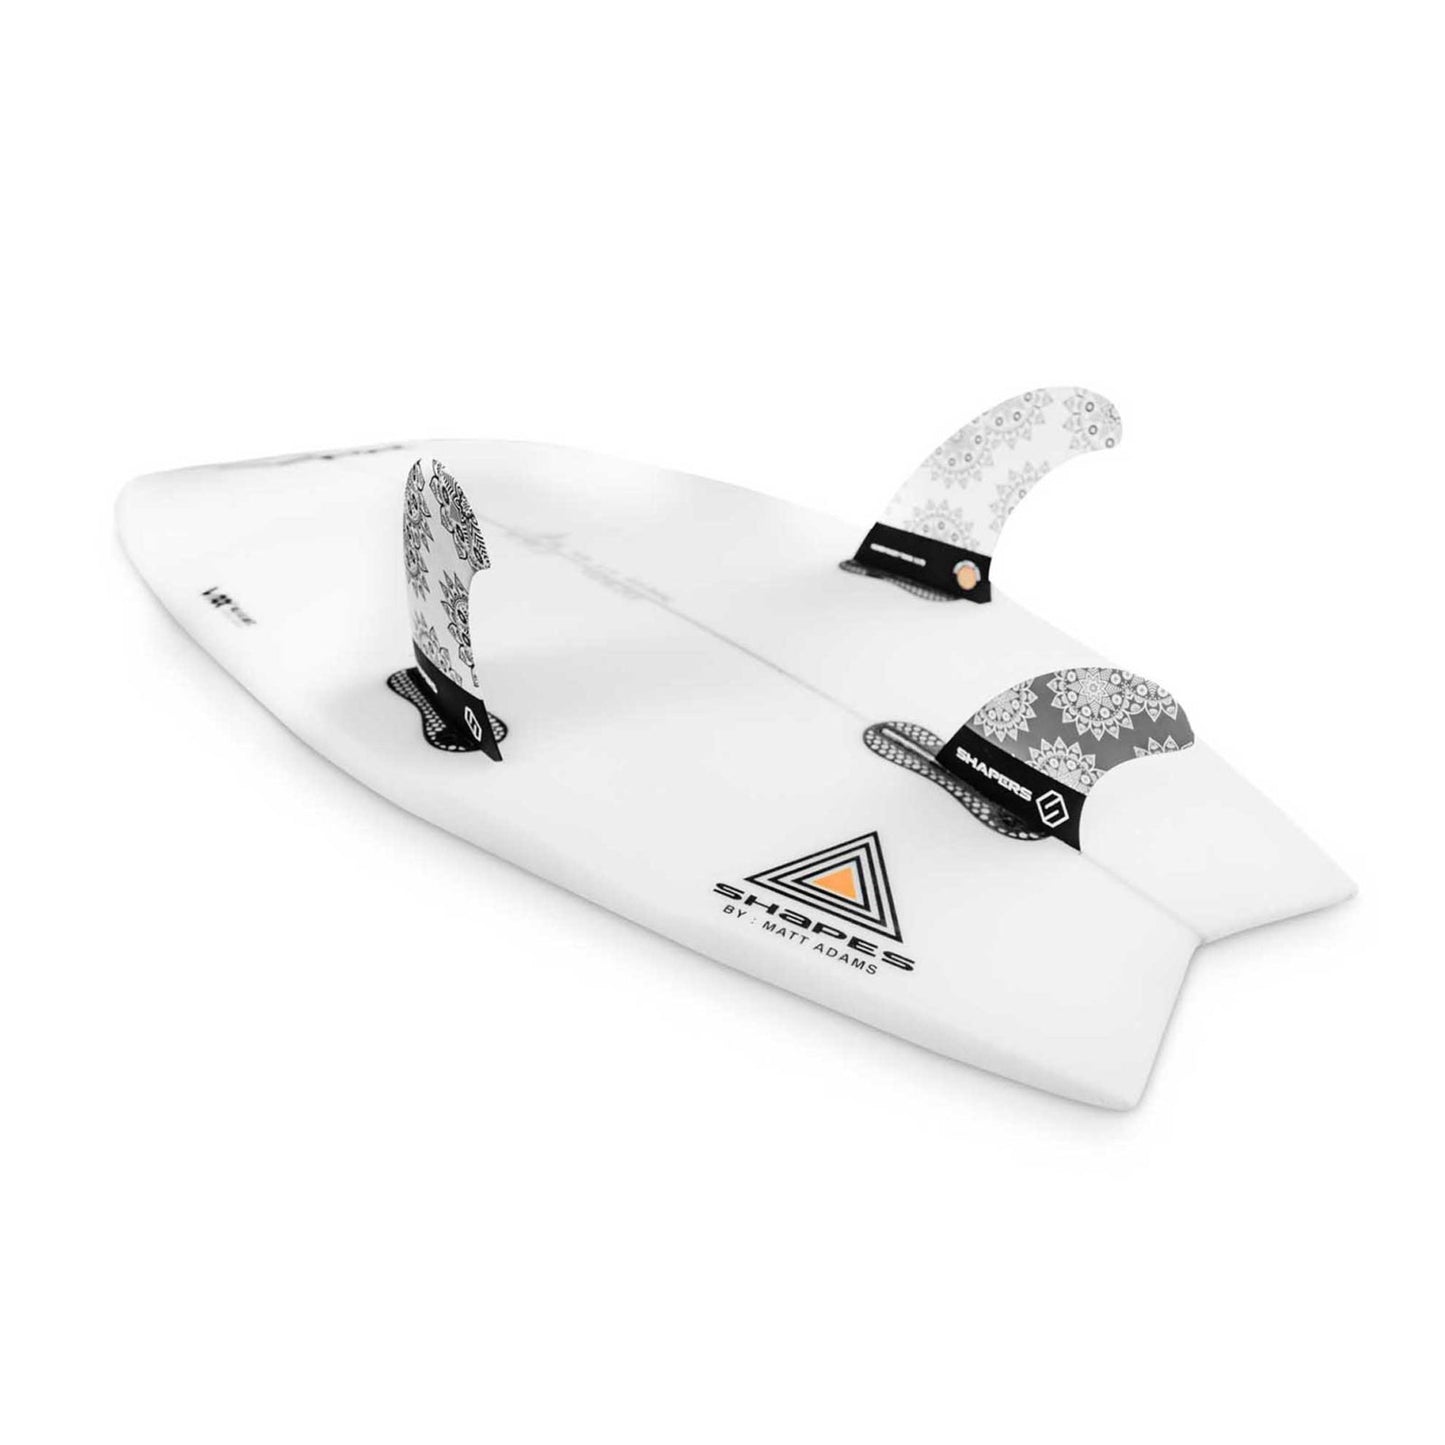 Double Wing High Performance Fish Surfboard